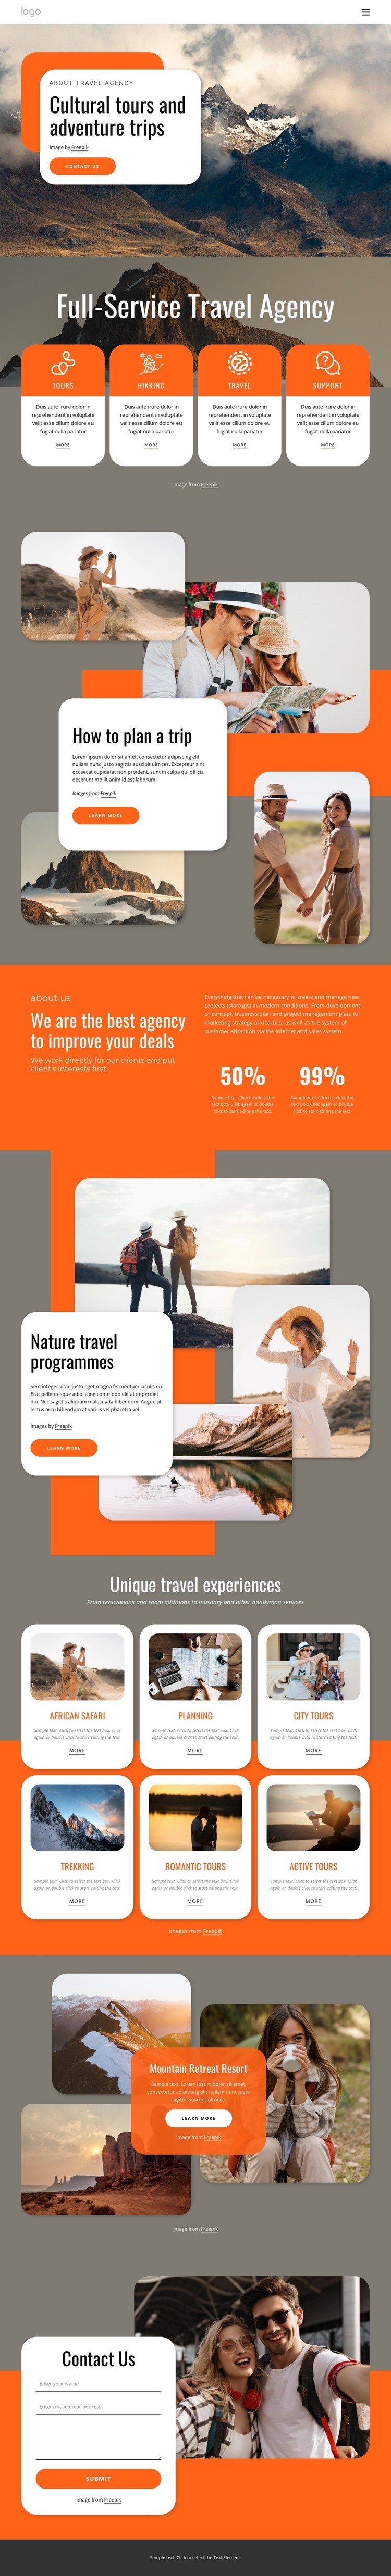 Group travel for all ages Web Page Design